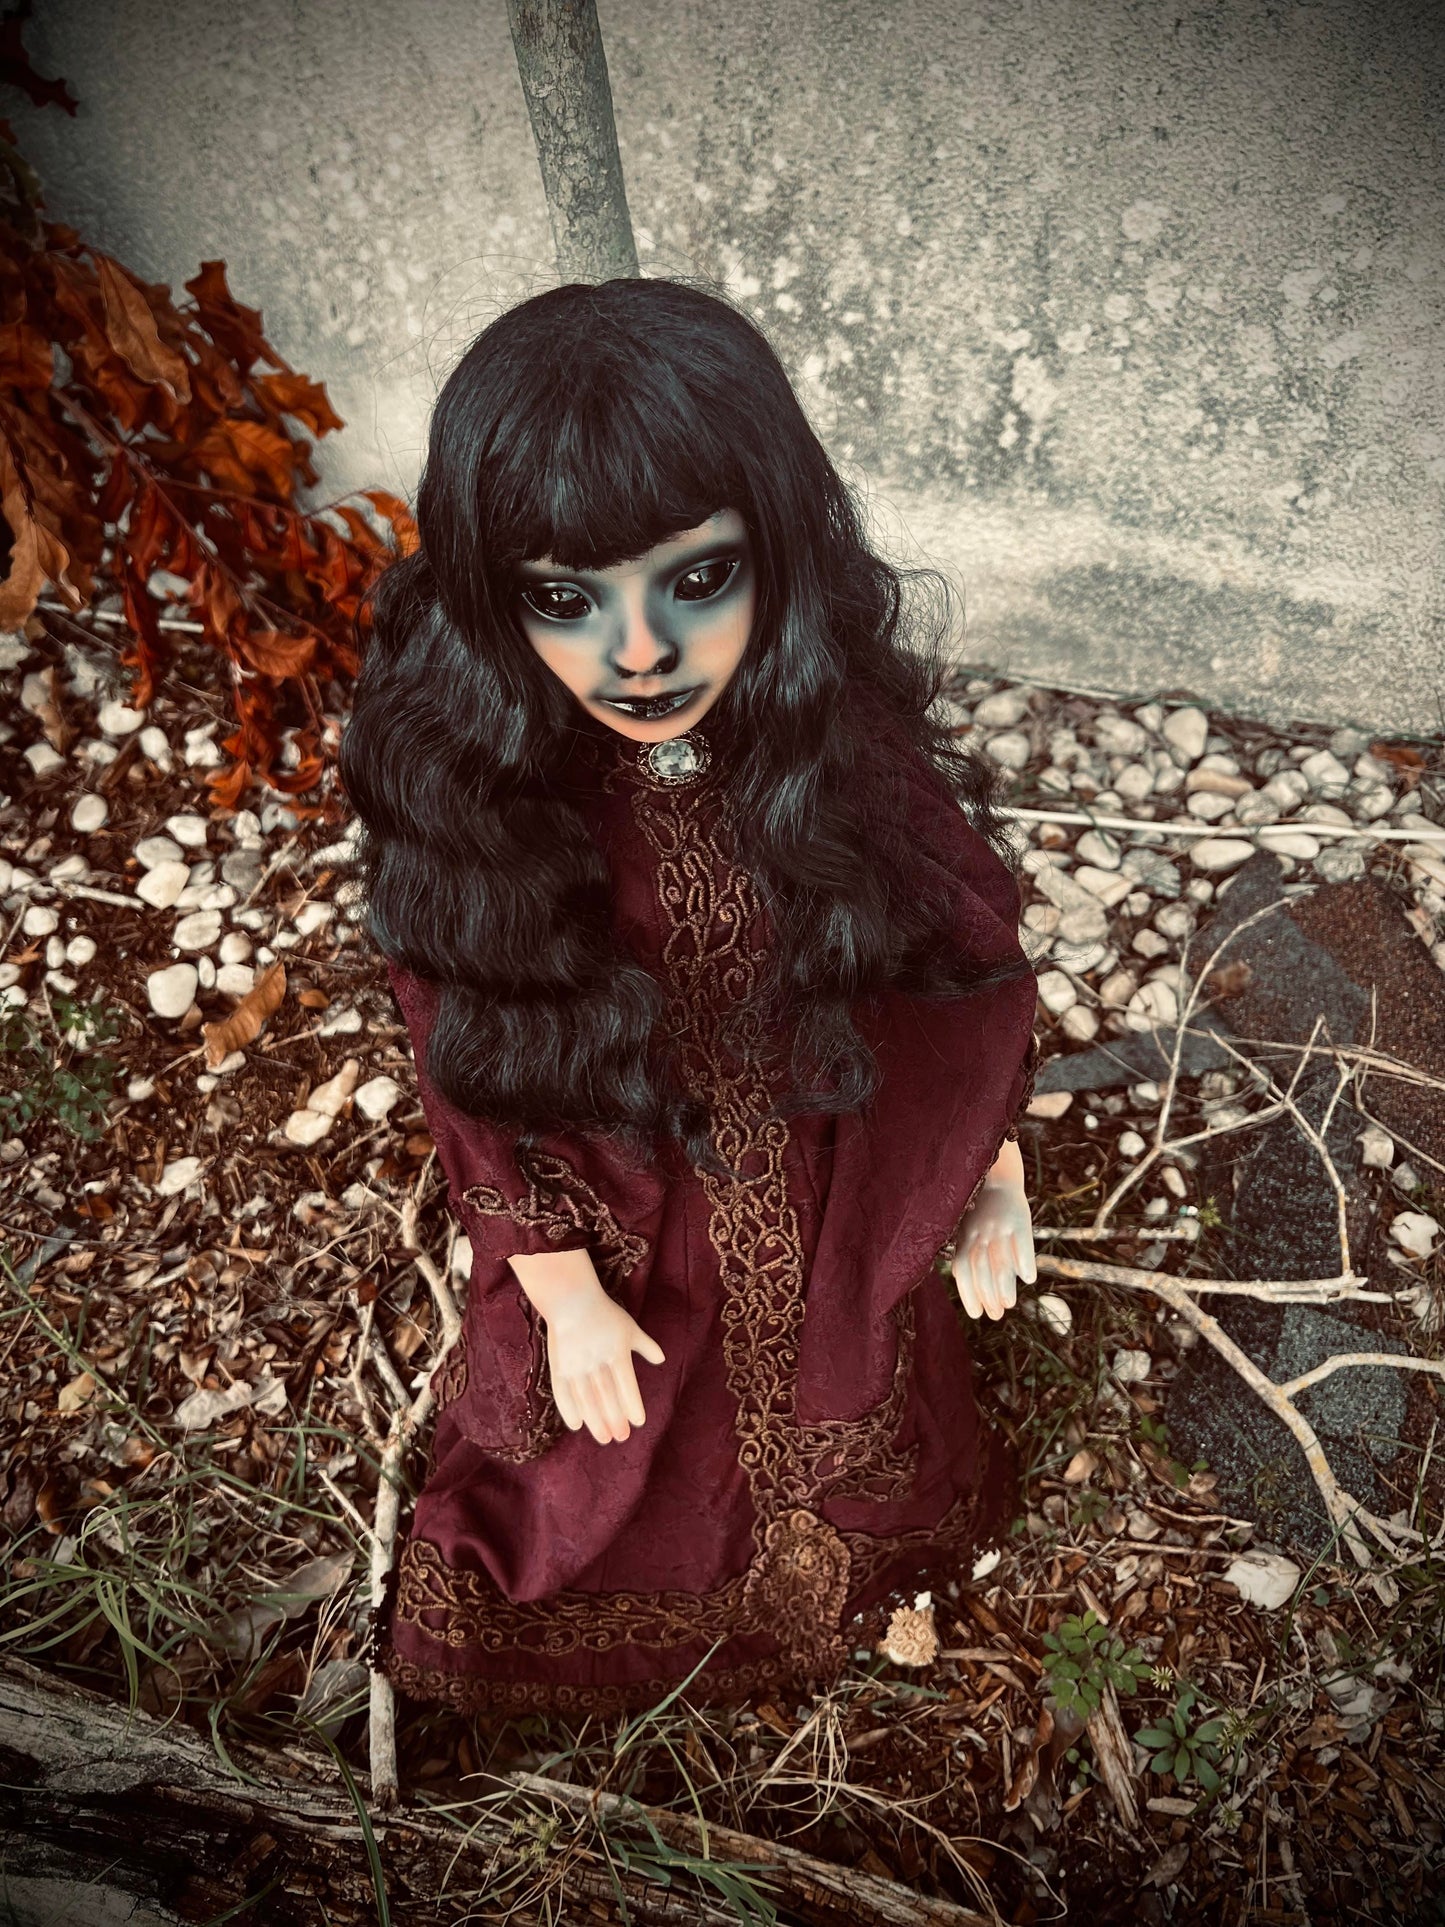 Meet Ophelia 28" Doll Porcelain Witchy Creepy Haunted Spirit Infected Scary Poltergeist Spooky Wicca Possessed Fall Gothic Positive Energy